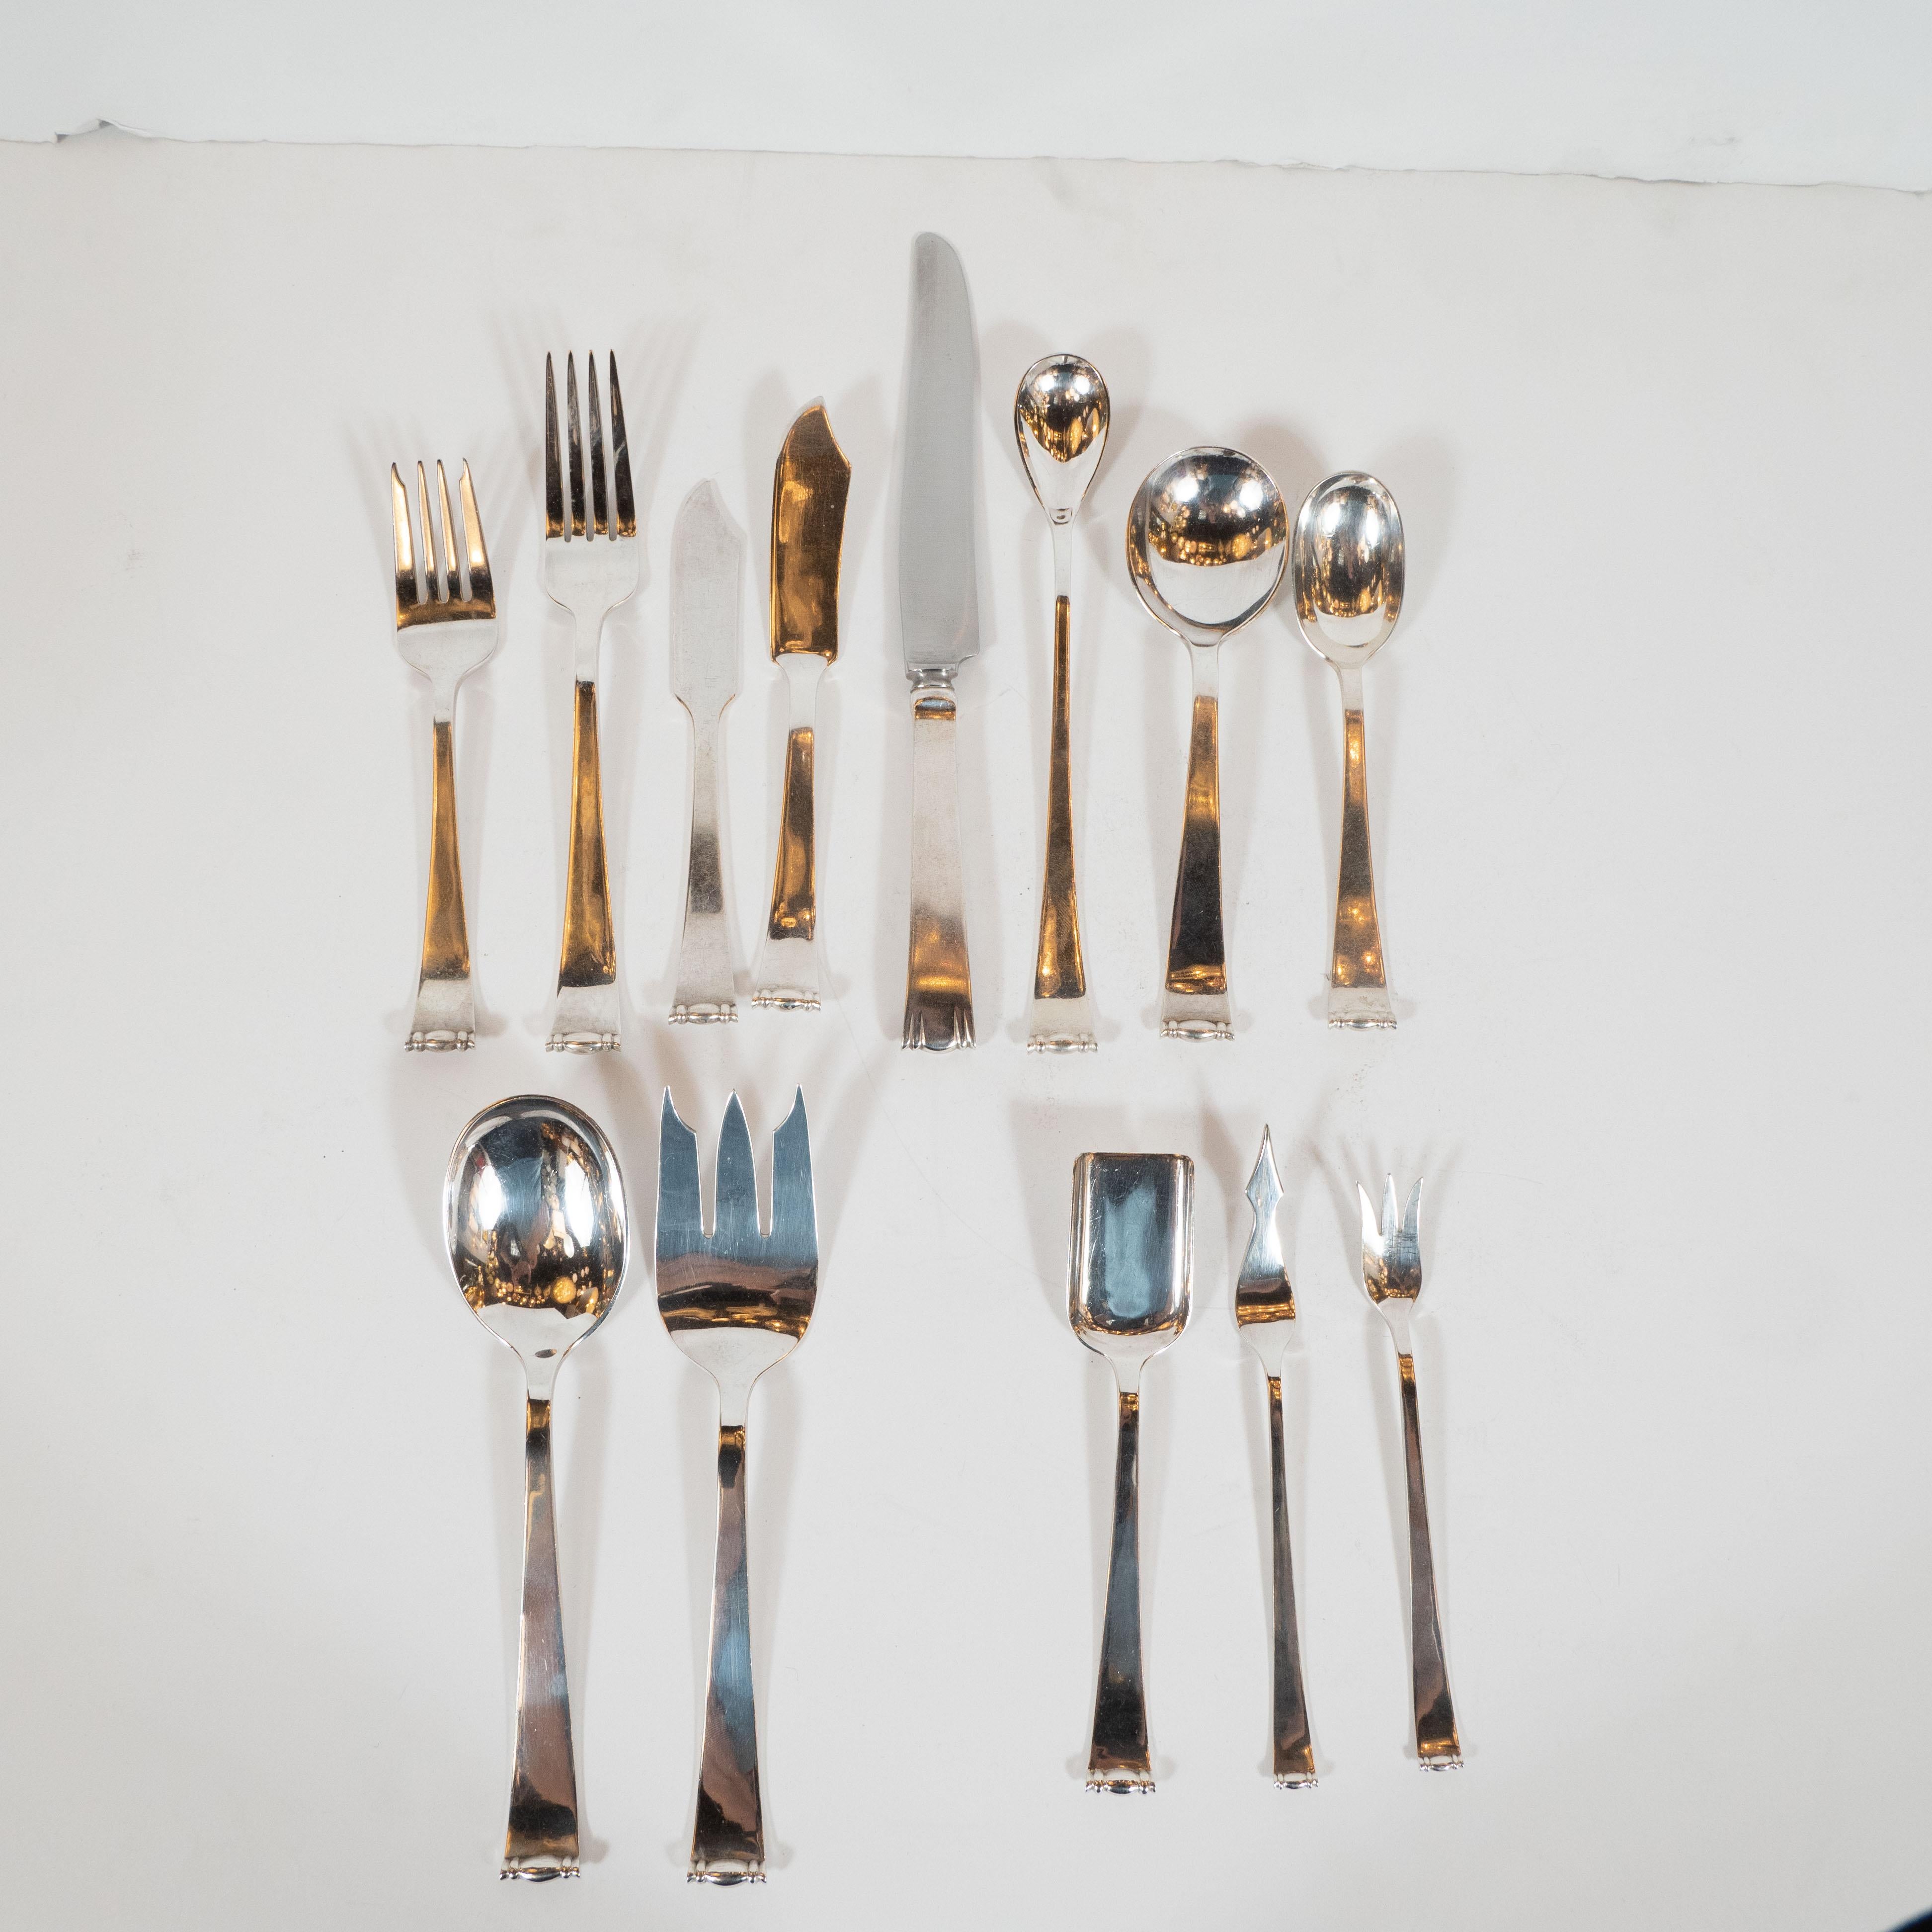 This stunning sterling silver flatware service was designed by the celebrated American silversmith Allan Adler and was handwrought in his Los Angeles studio circa 1945. During the 1940s, Adler won over the Hollywood elite with his clean, simple,